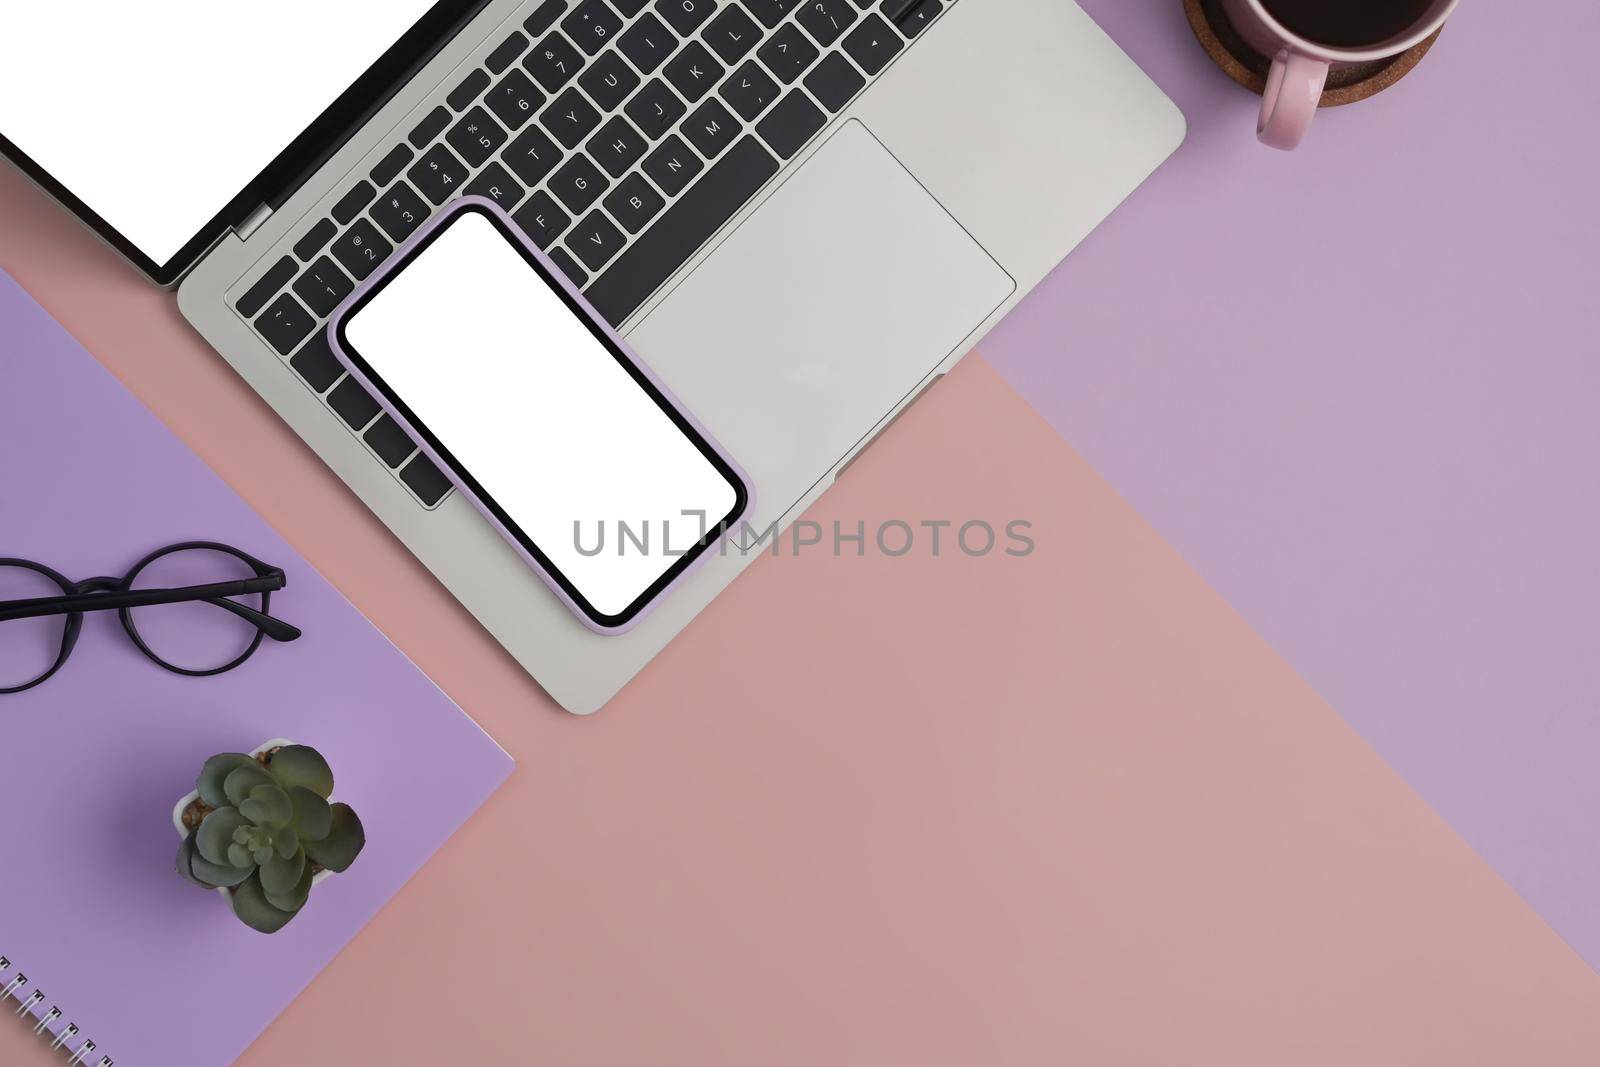 Flat lay mockup laptop computer, smartphone, glasses and coffee cup on two tone background. by prathanchorruangsak